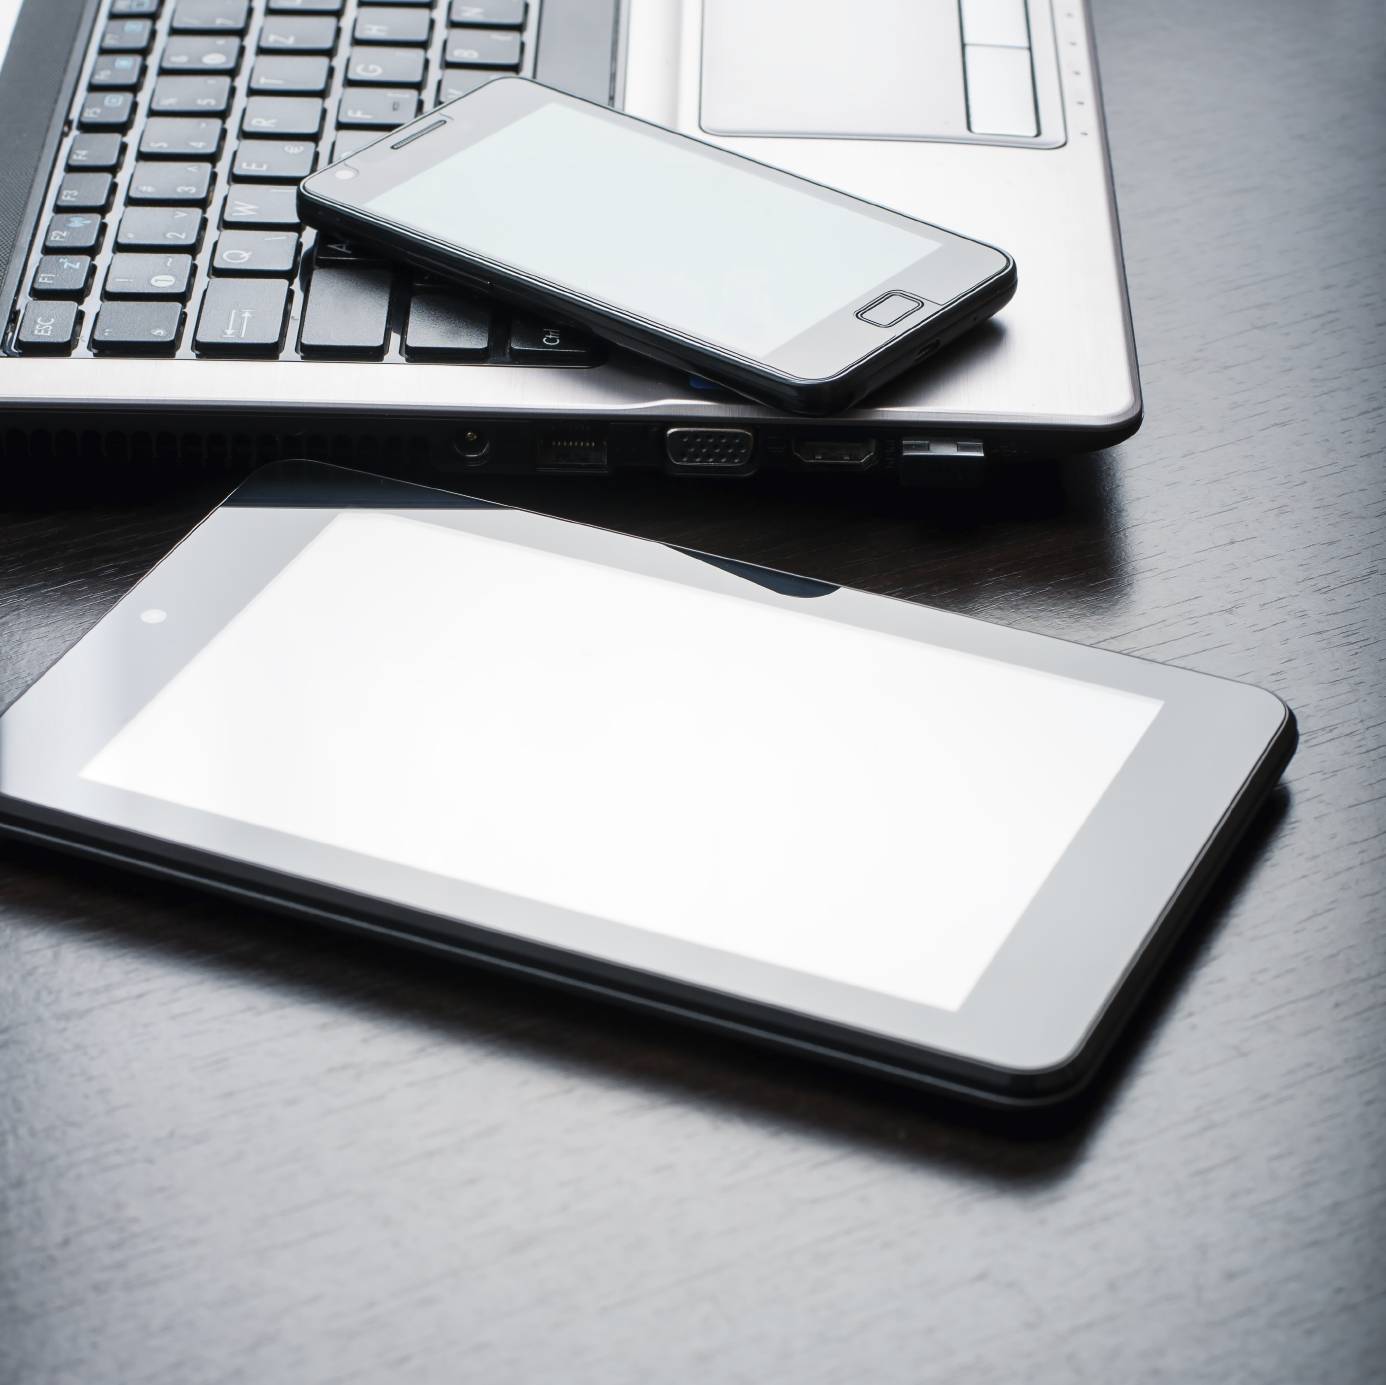 stock photo - laptop, tablet and smartphone